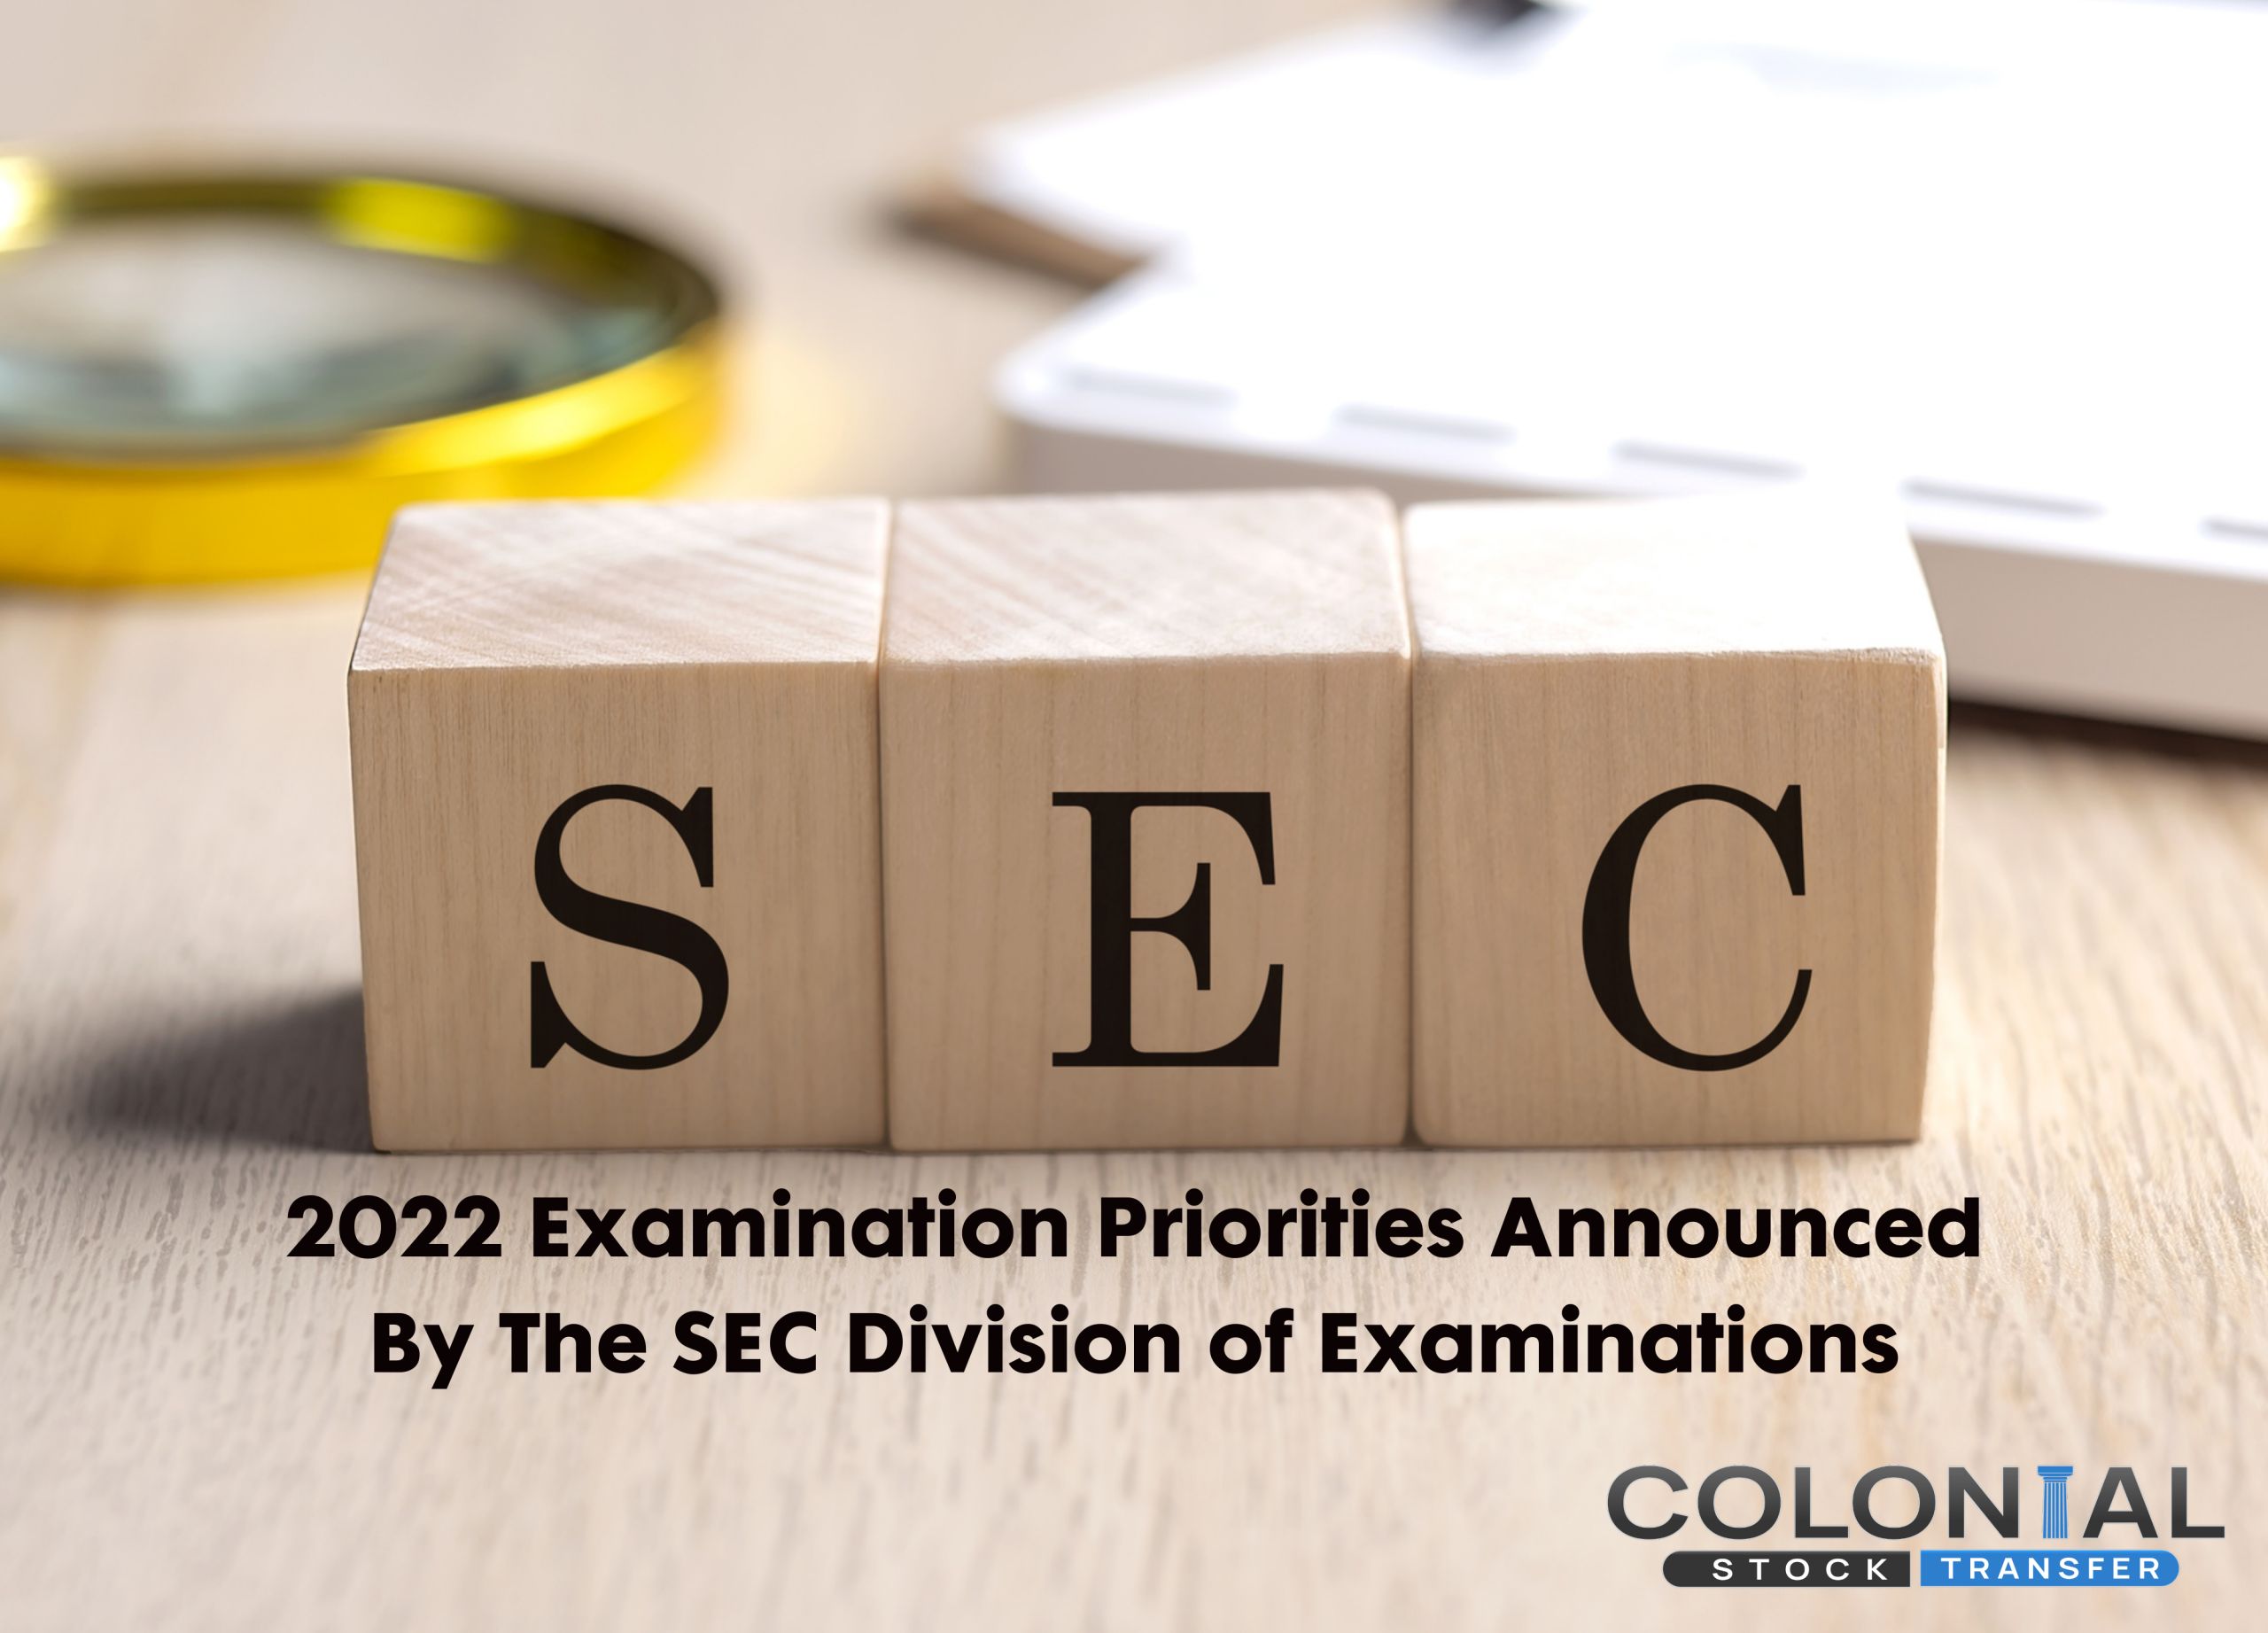 2022 Examination Priorities Announced By The SEC Division of Examinations